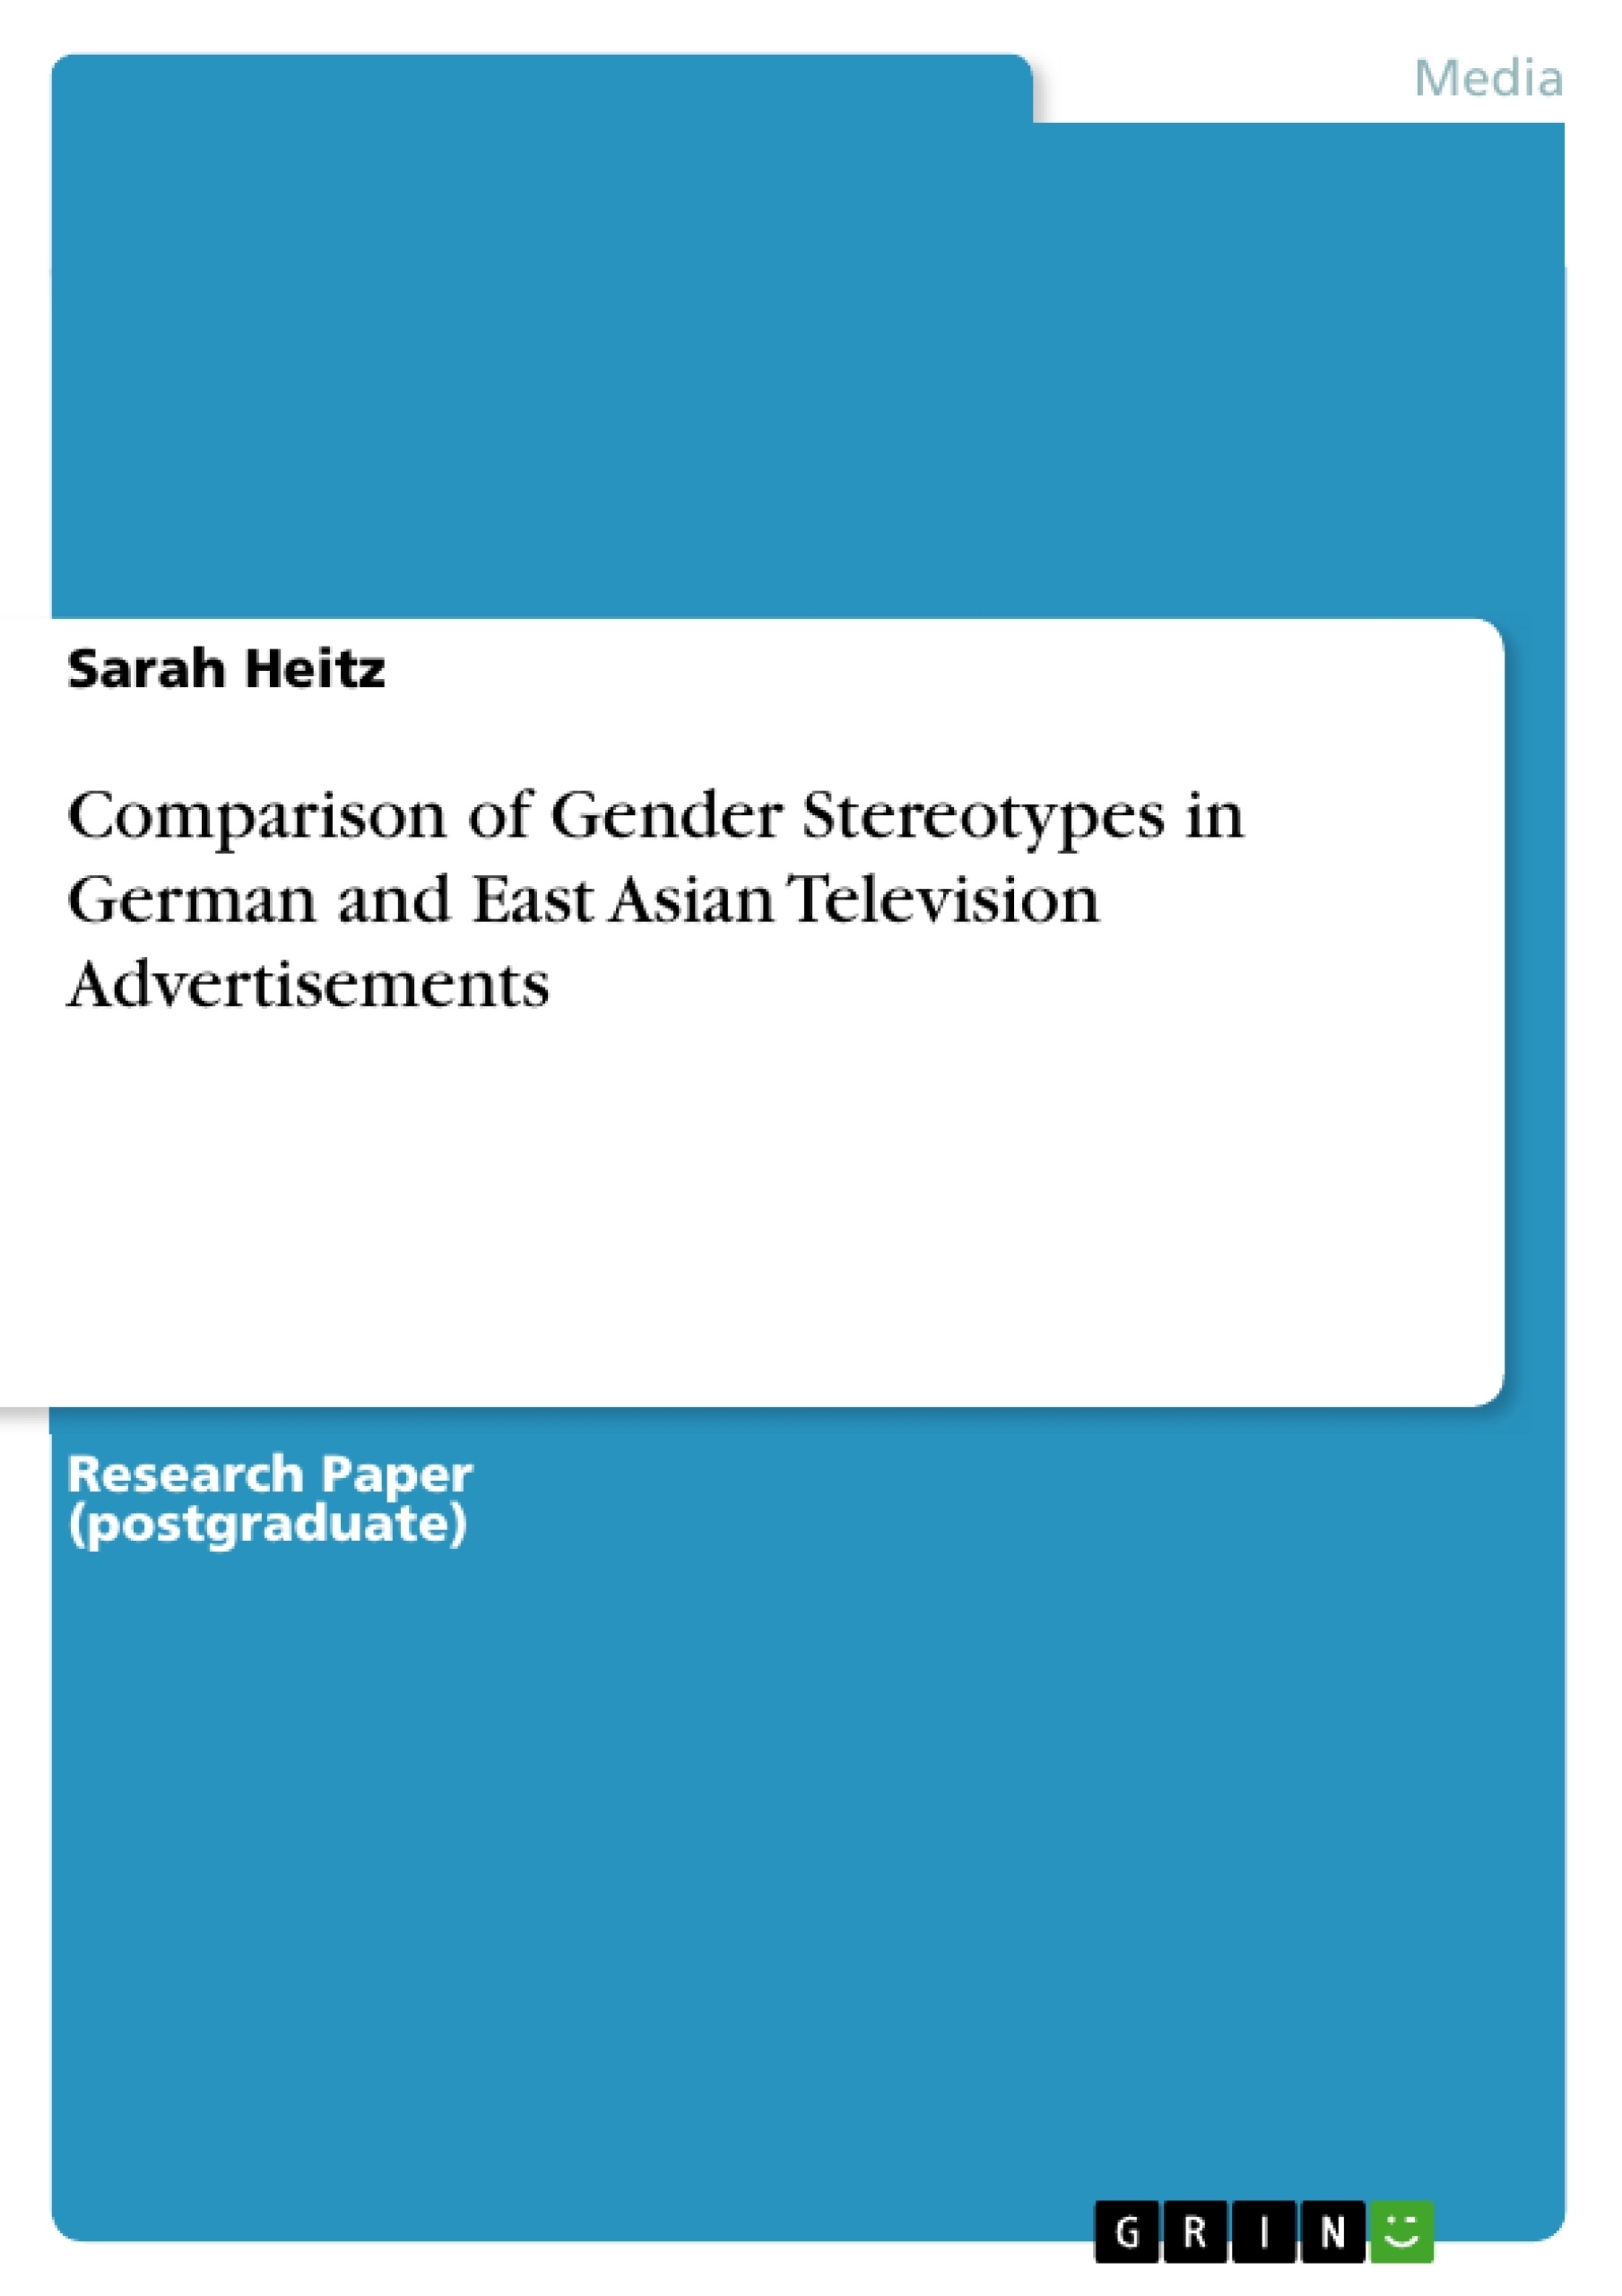 Title: Comparison of Gender Stereotypes in German and East Asian Television Advertisements